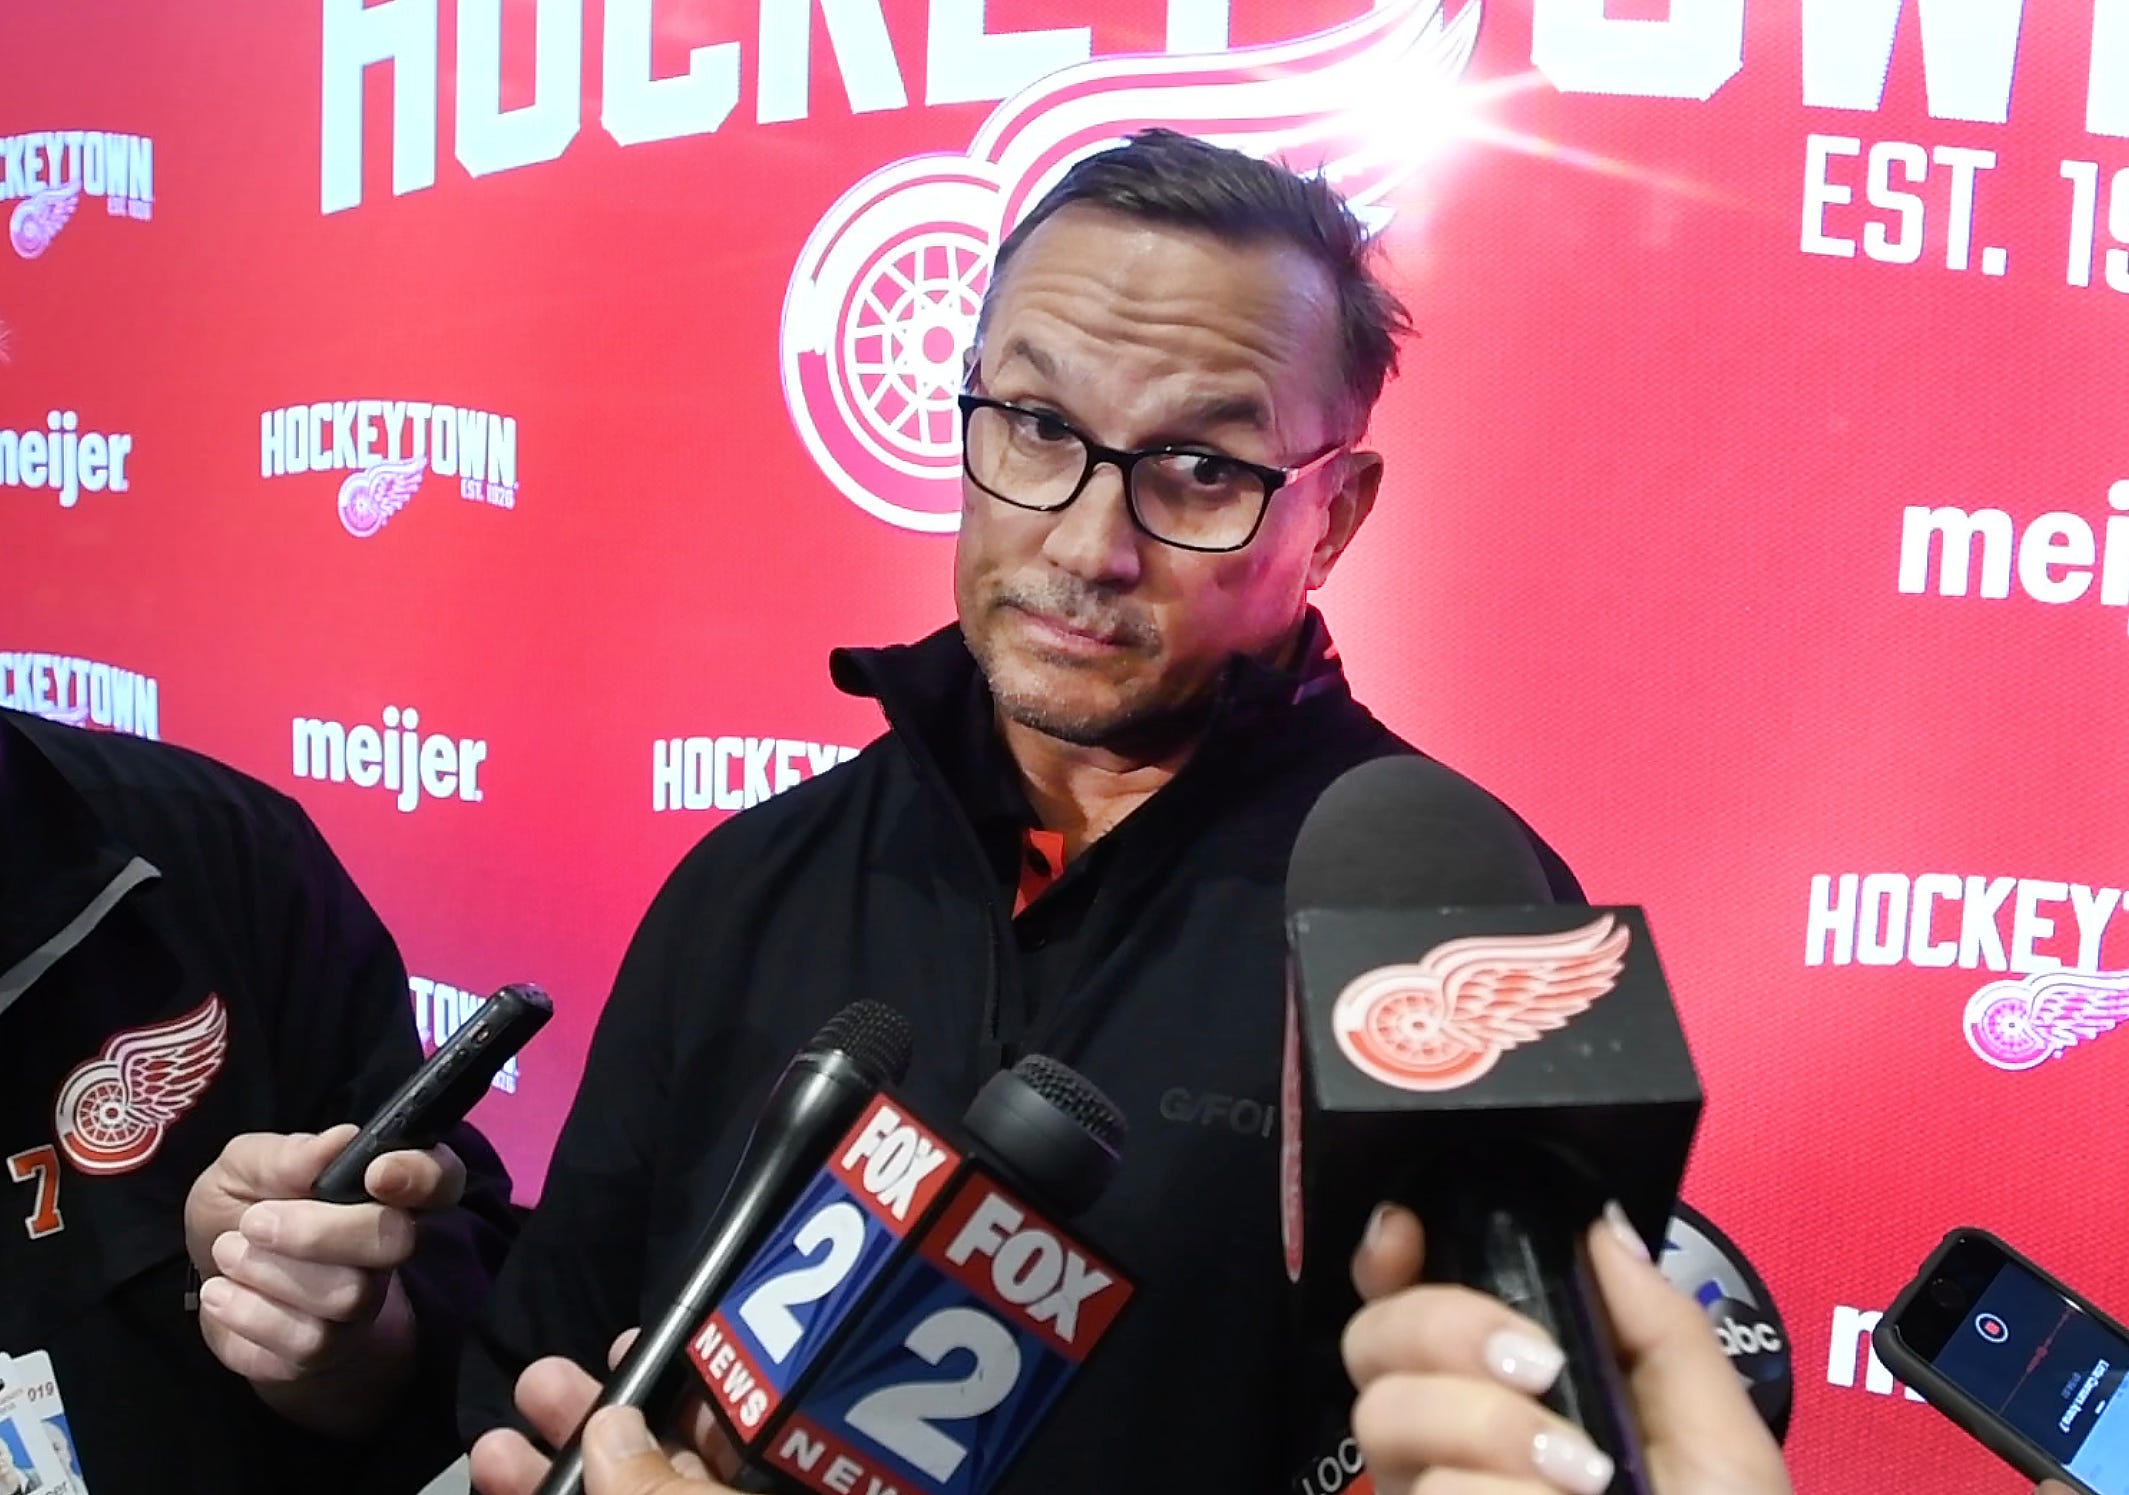 Steve Yzerman resigns as Lightning GM; could he soon be winging home?